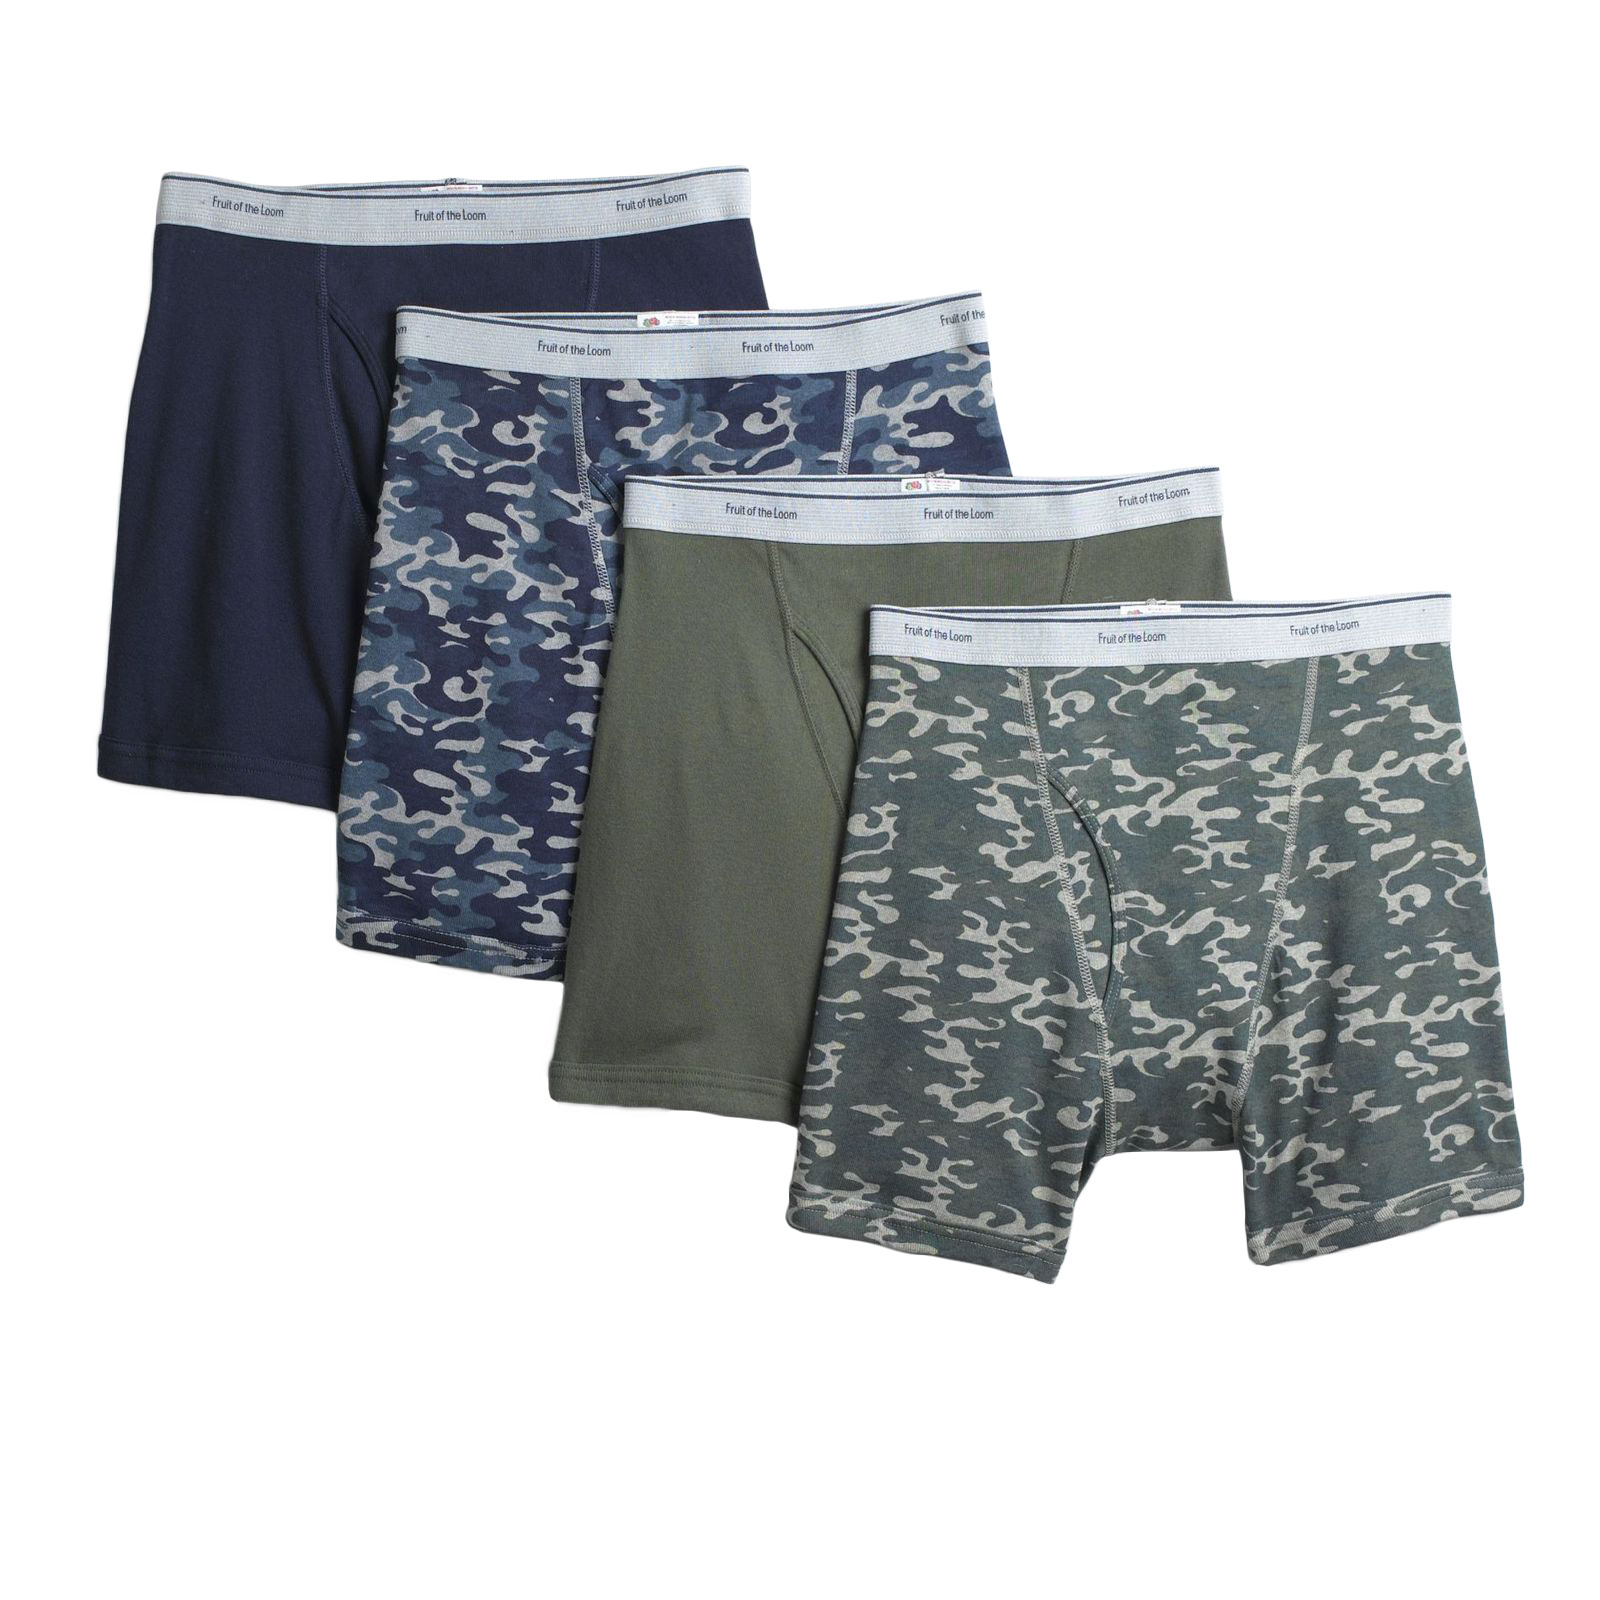 Fruit of the Loom Men's 4-Pack Print & Solids Boxer Briefs